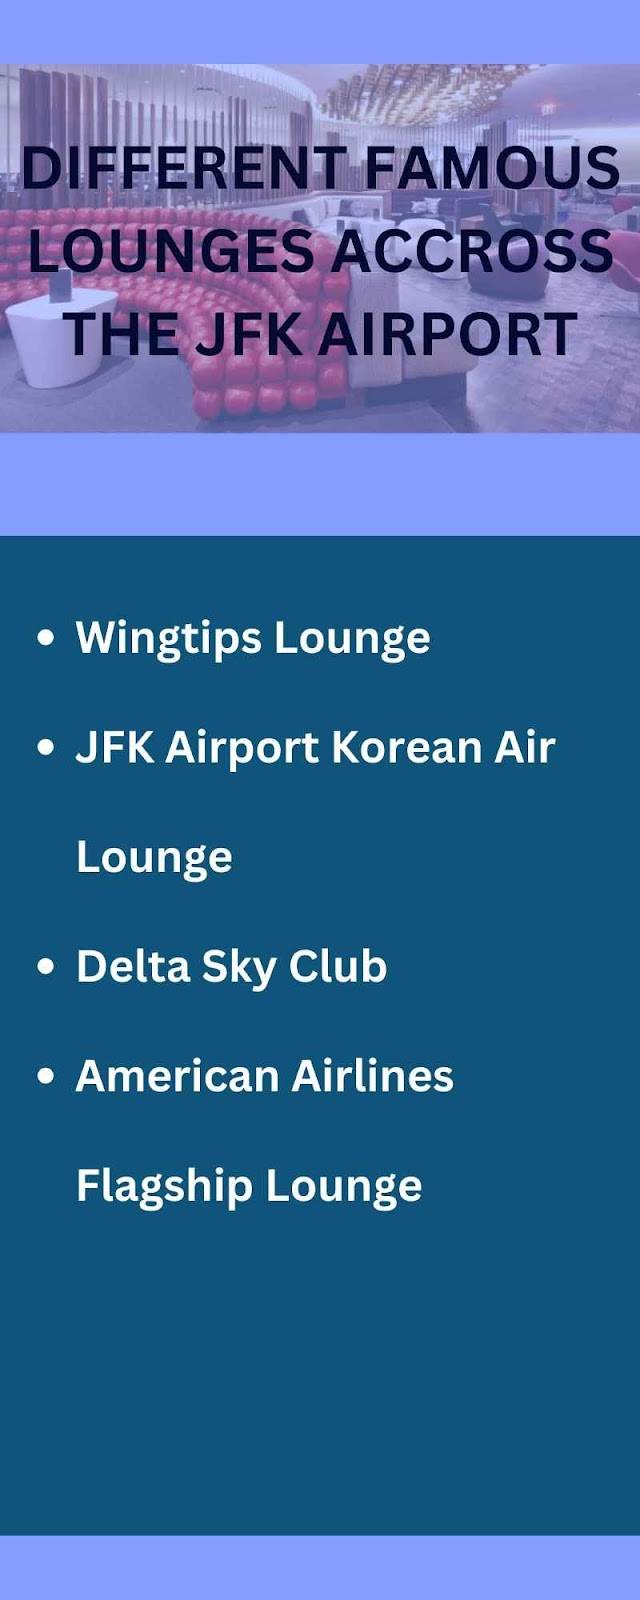 Different Famous Lounges Across the JFK Airport